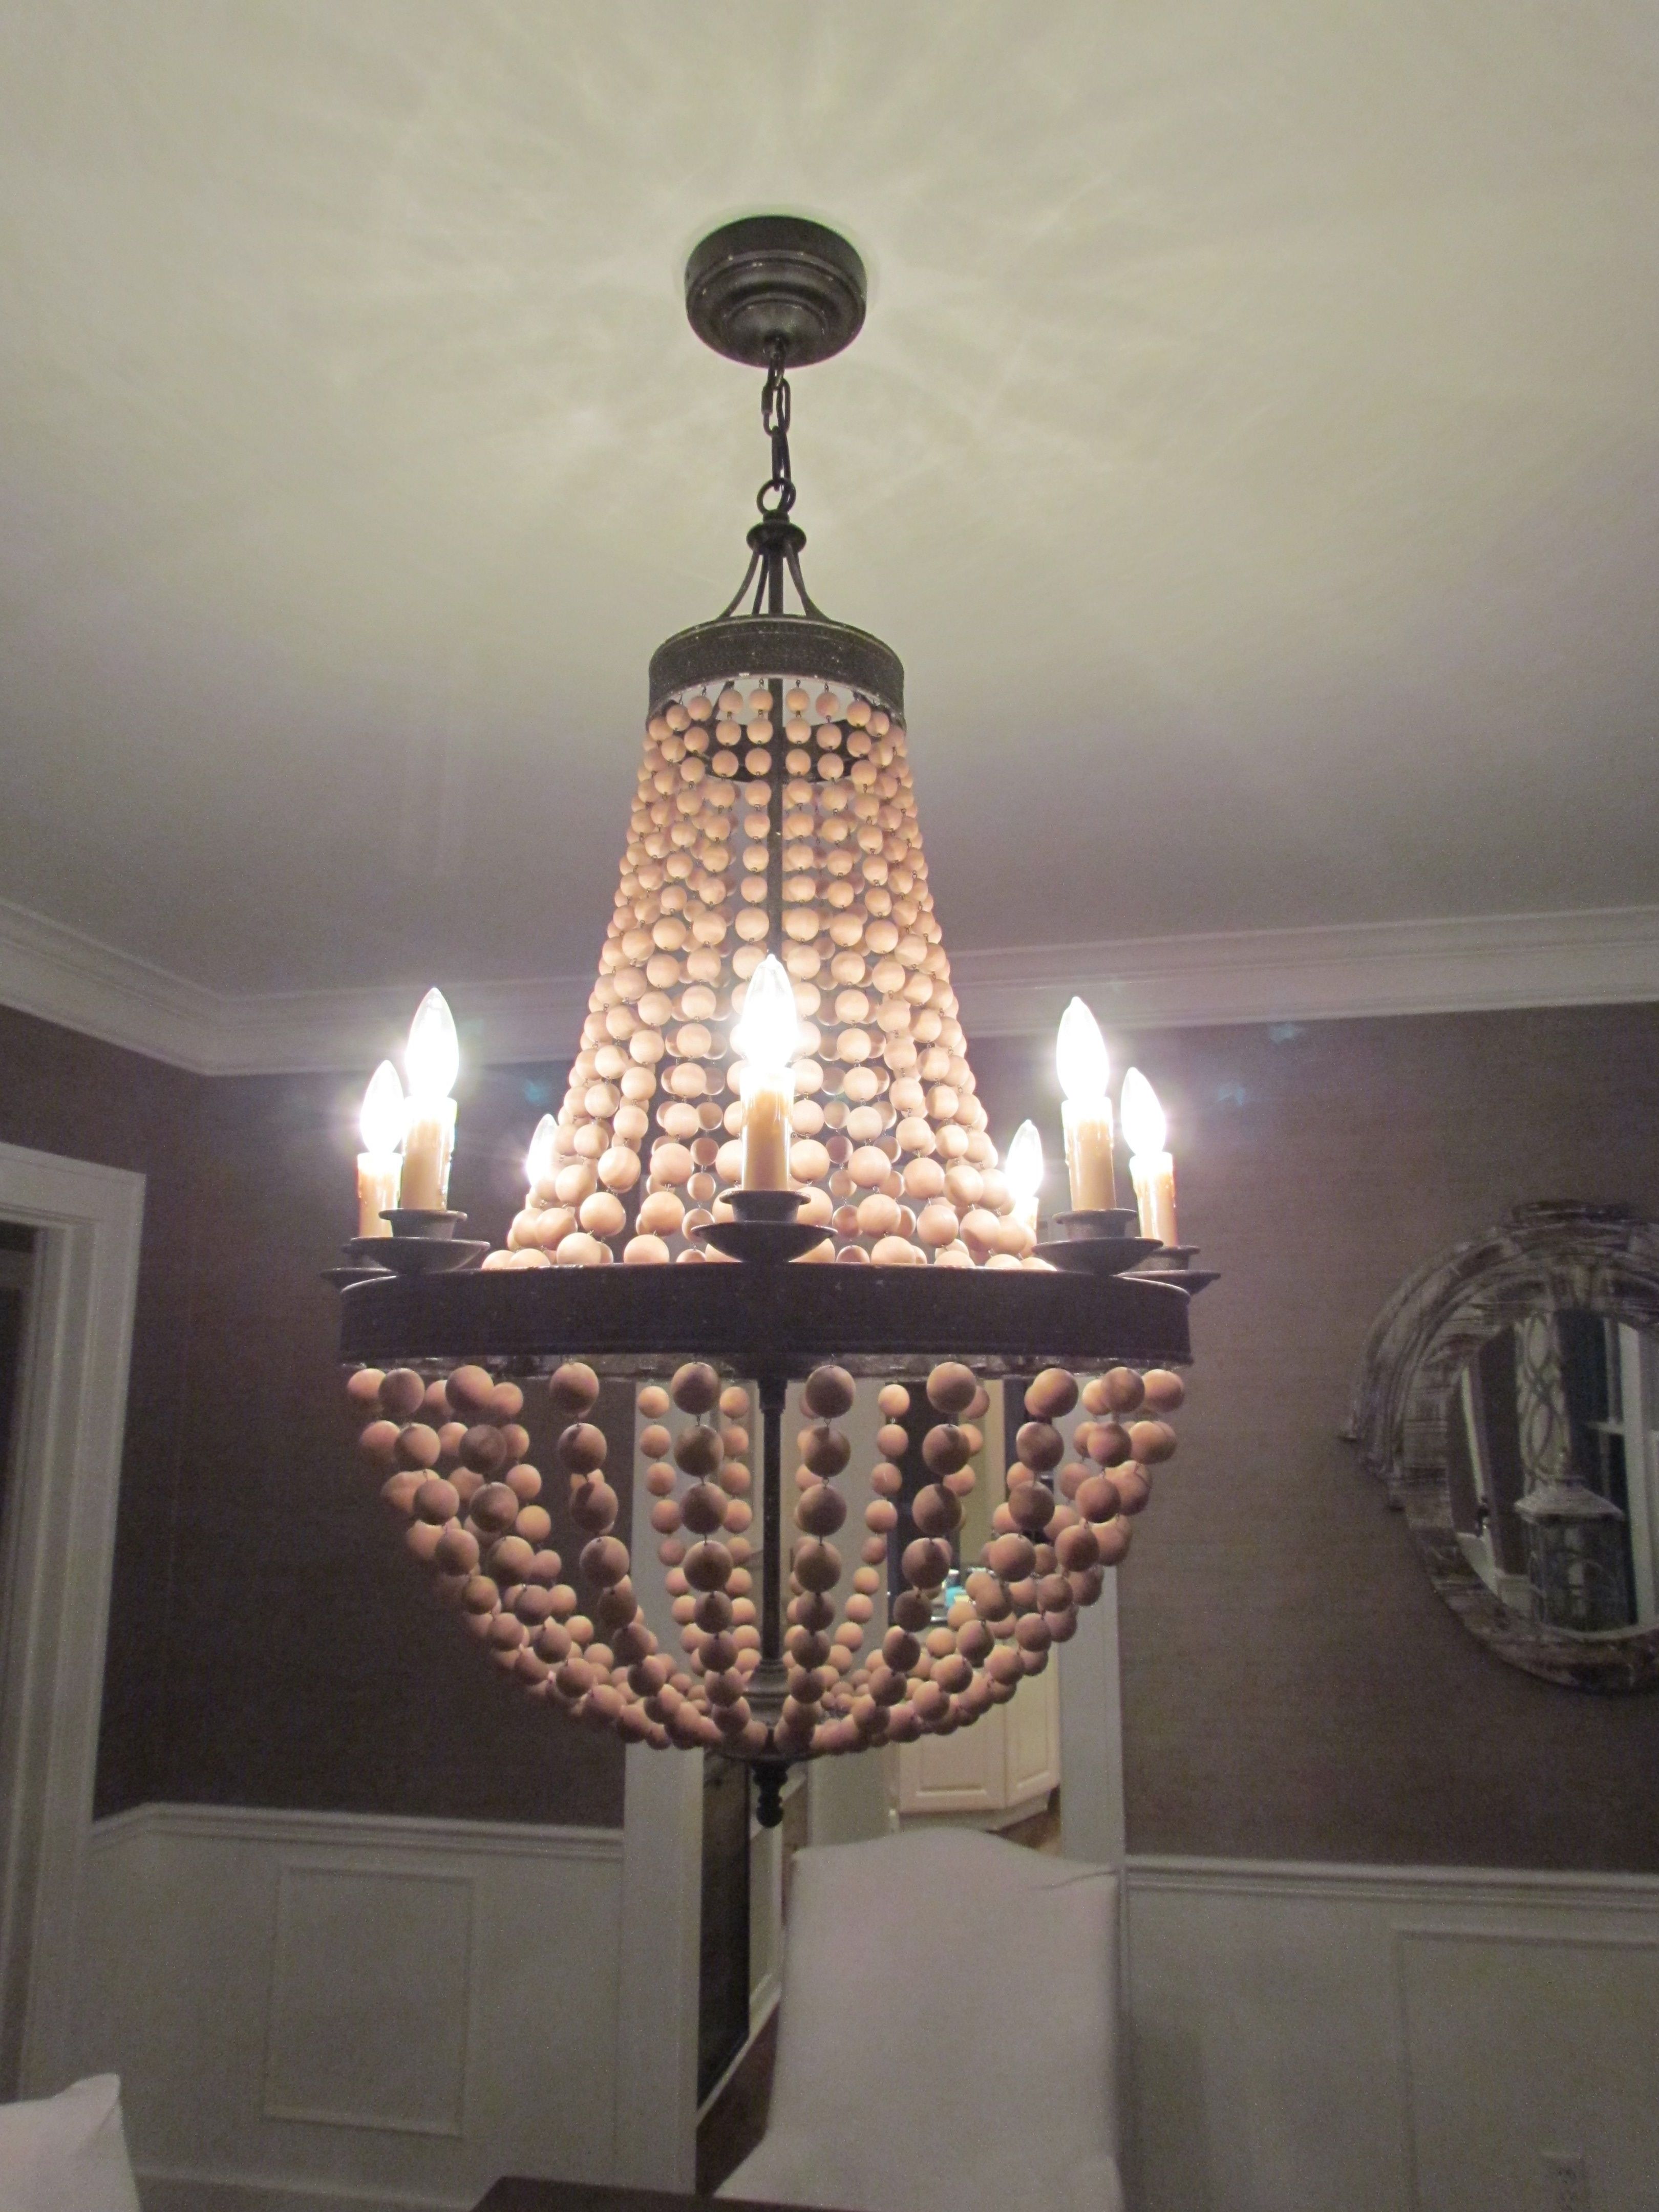 Pottery Barn Chandelier Knock Off Instructions Wine Bottle Lamp Intended For Most Up To Date Outdoor Lanterns At Pottery Barn (View 18 of 20)